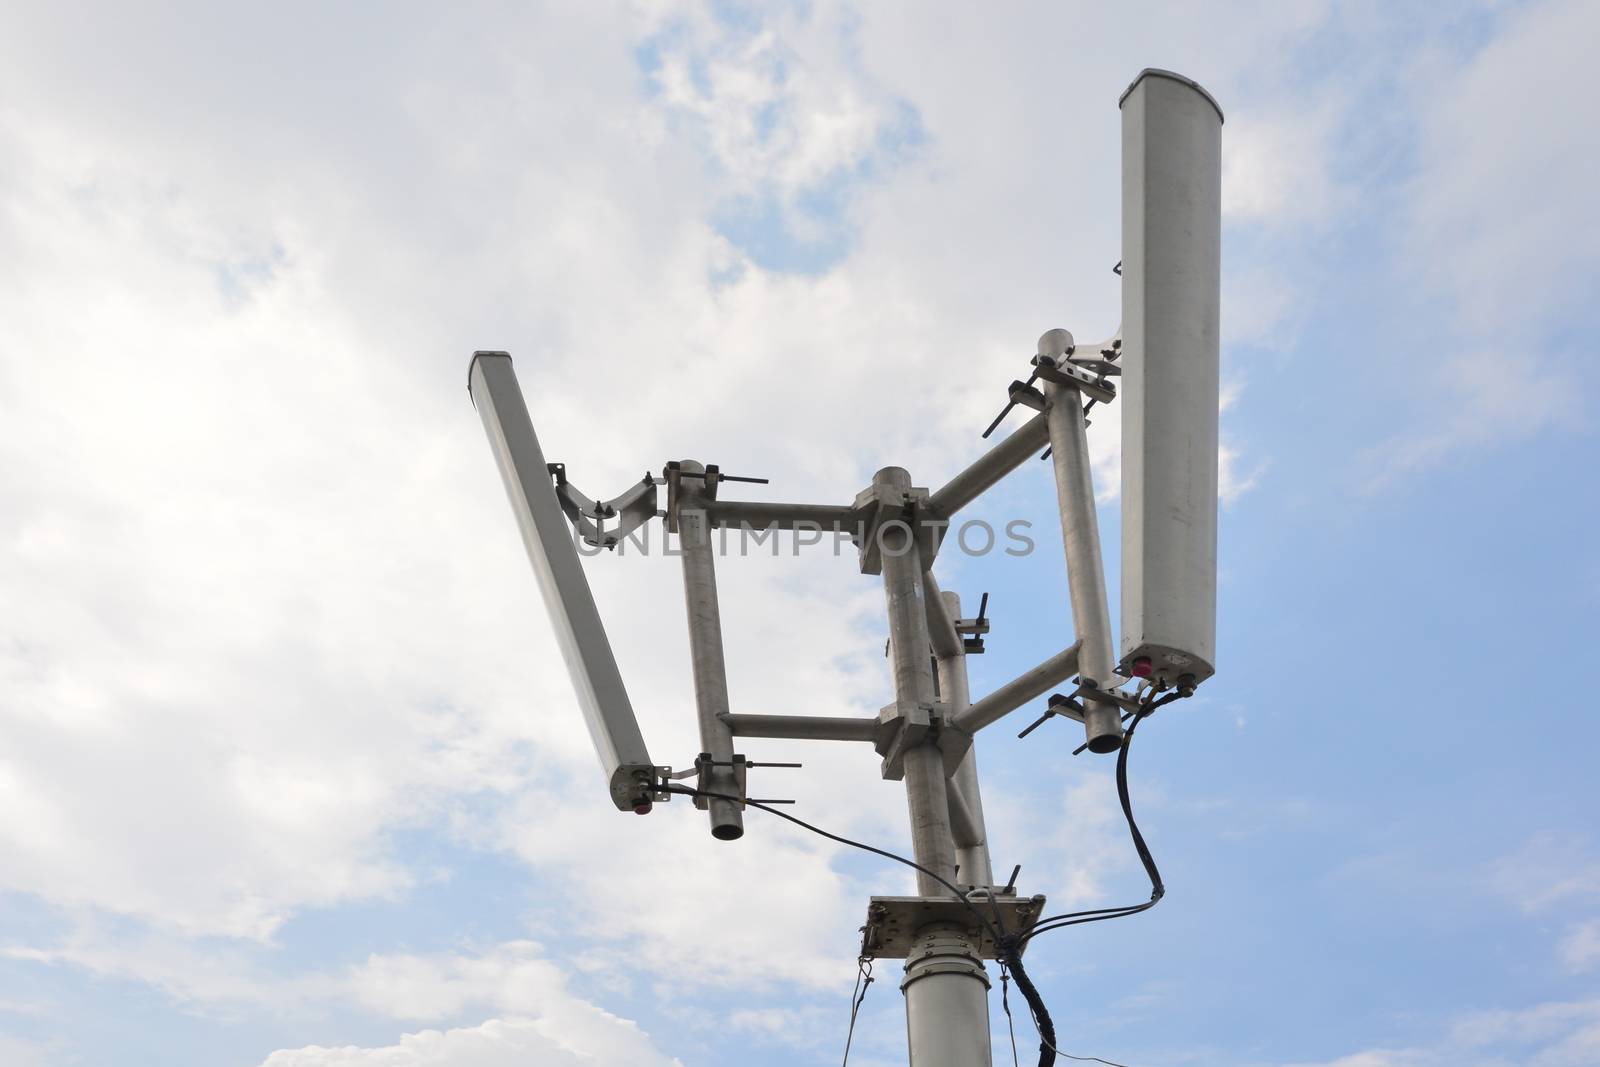 Mobile phone signal repeater equipment on the roof